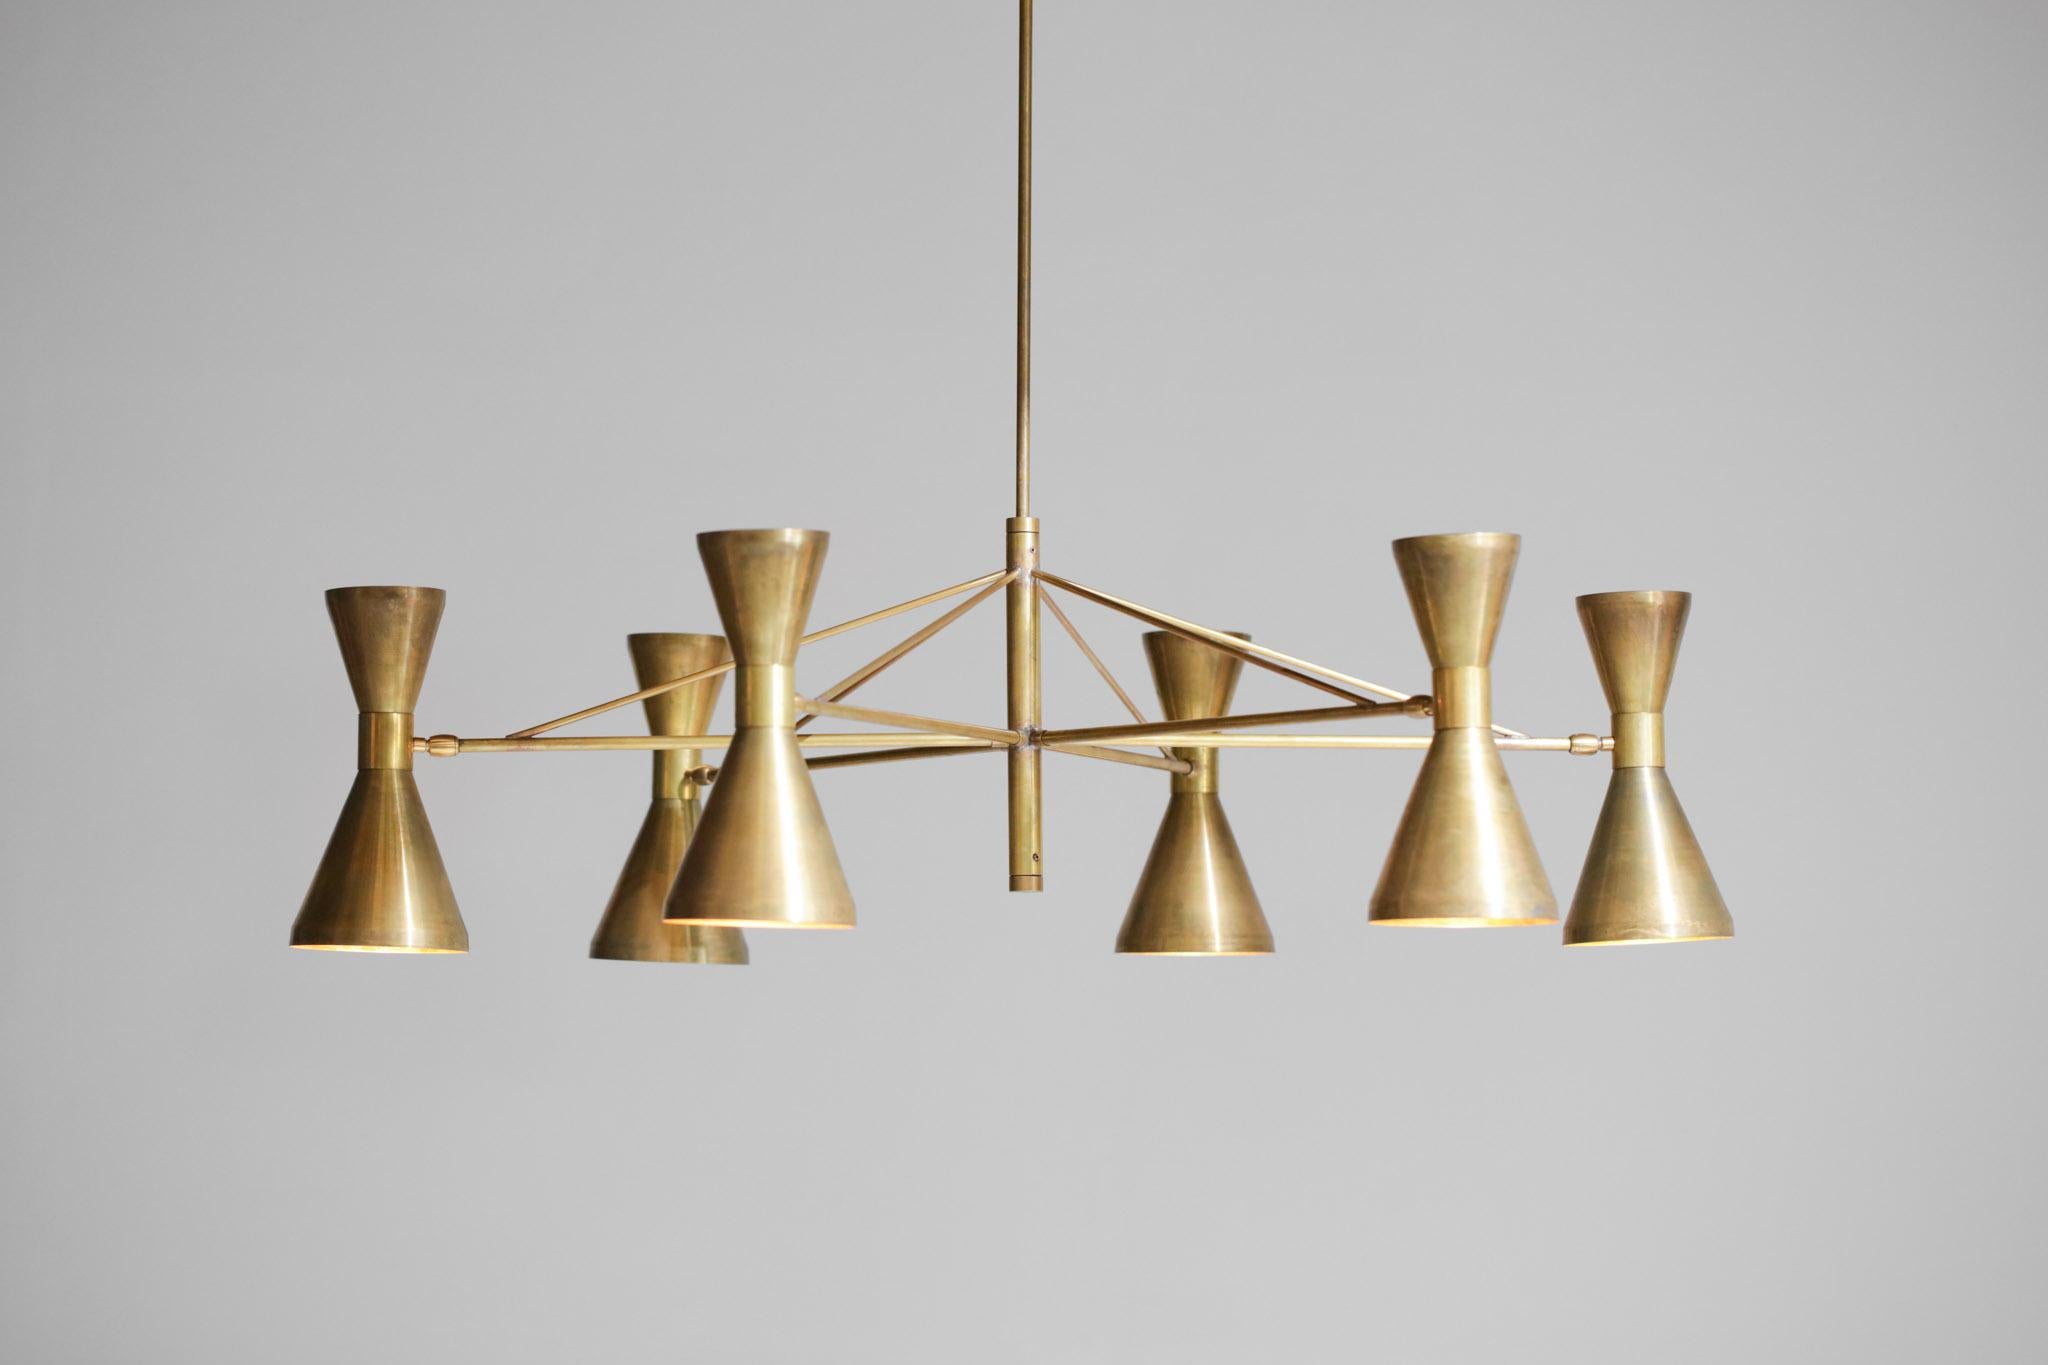 Beautiful modern Italian chandelier, handcrafted. Geometrical structure in solid brass with six arms connected by a central axis. All the Diabolo shades are made of brass and can be adjusted according to your needs. Very nice light and shadow effect